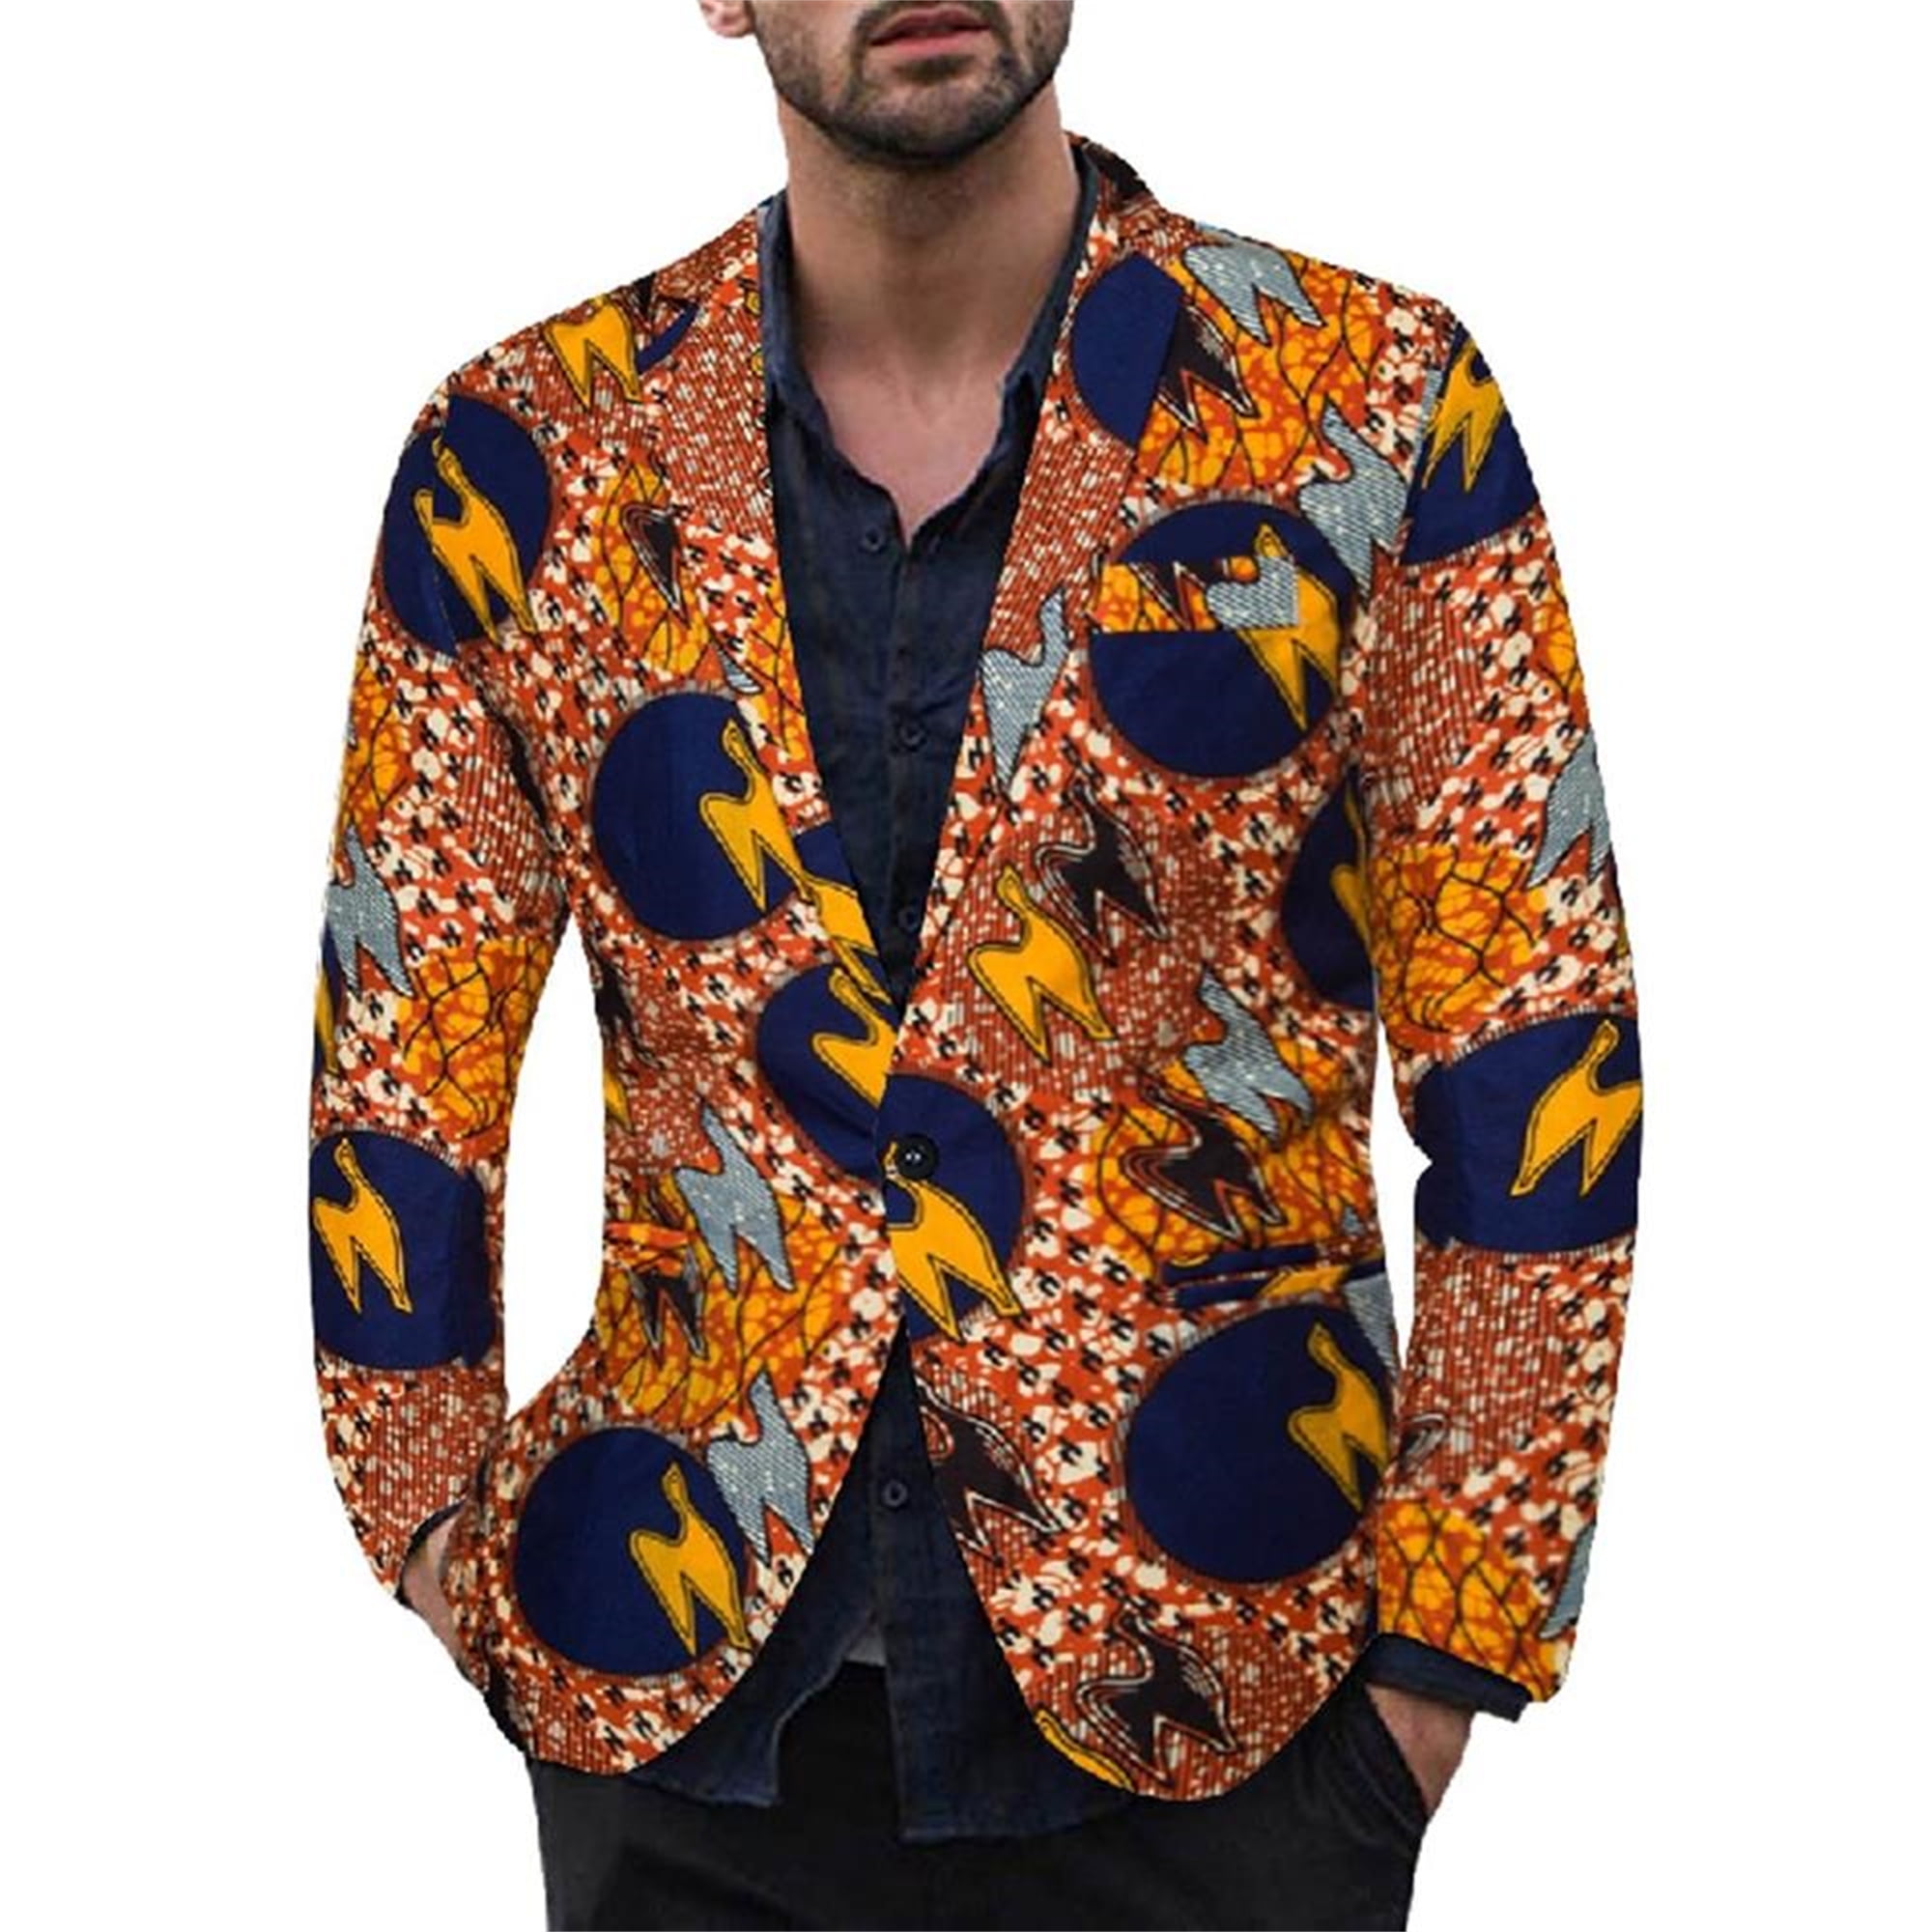 africa-pride Mens Clothing One Button Slim Fit Suit Print Long Jacket Coats+Pants Set Dashiki Outfit 